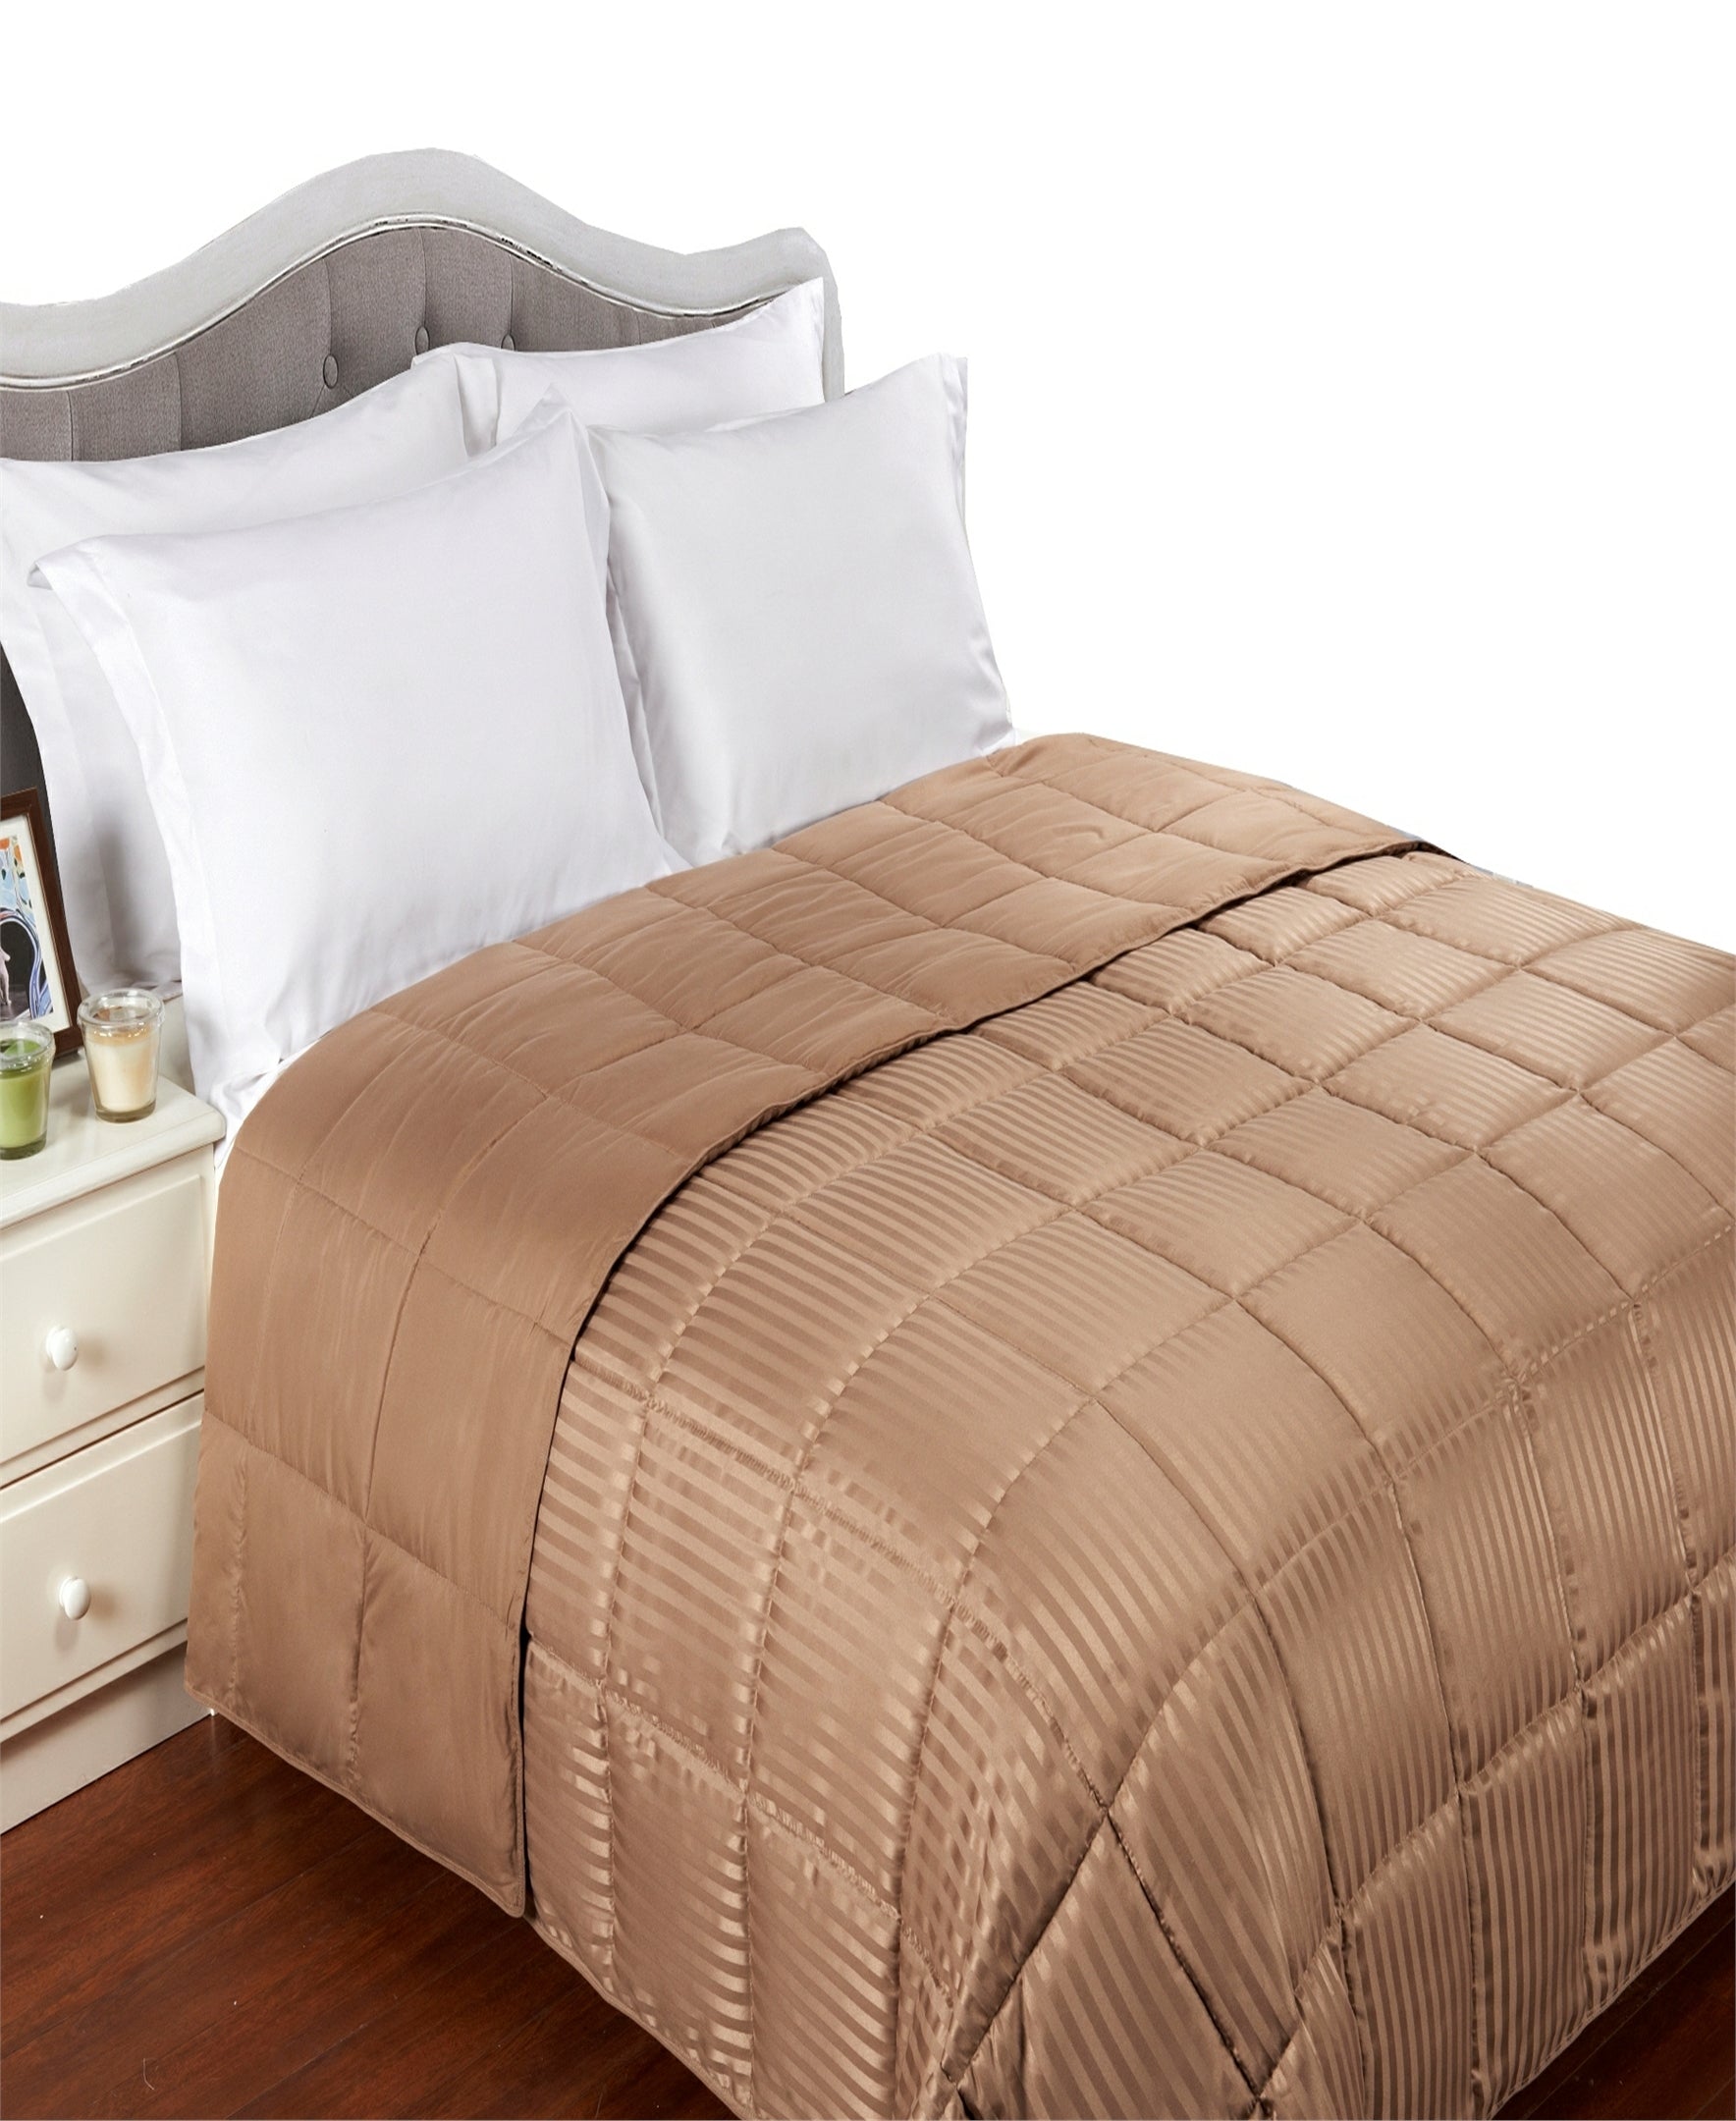 Reversible All Season Down Alternative Solid Bed Blanket - Taupe